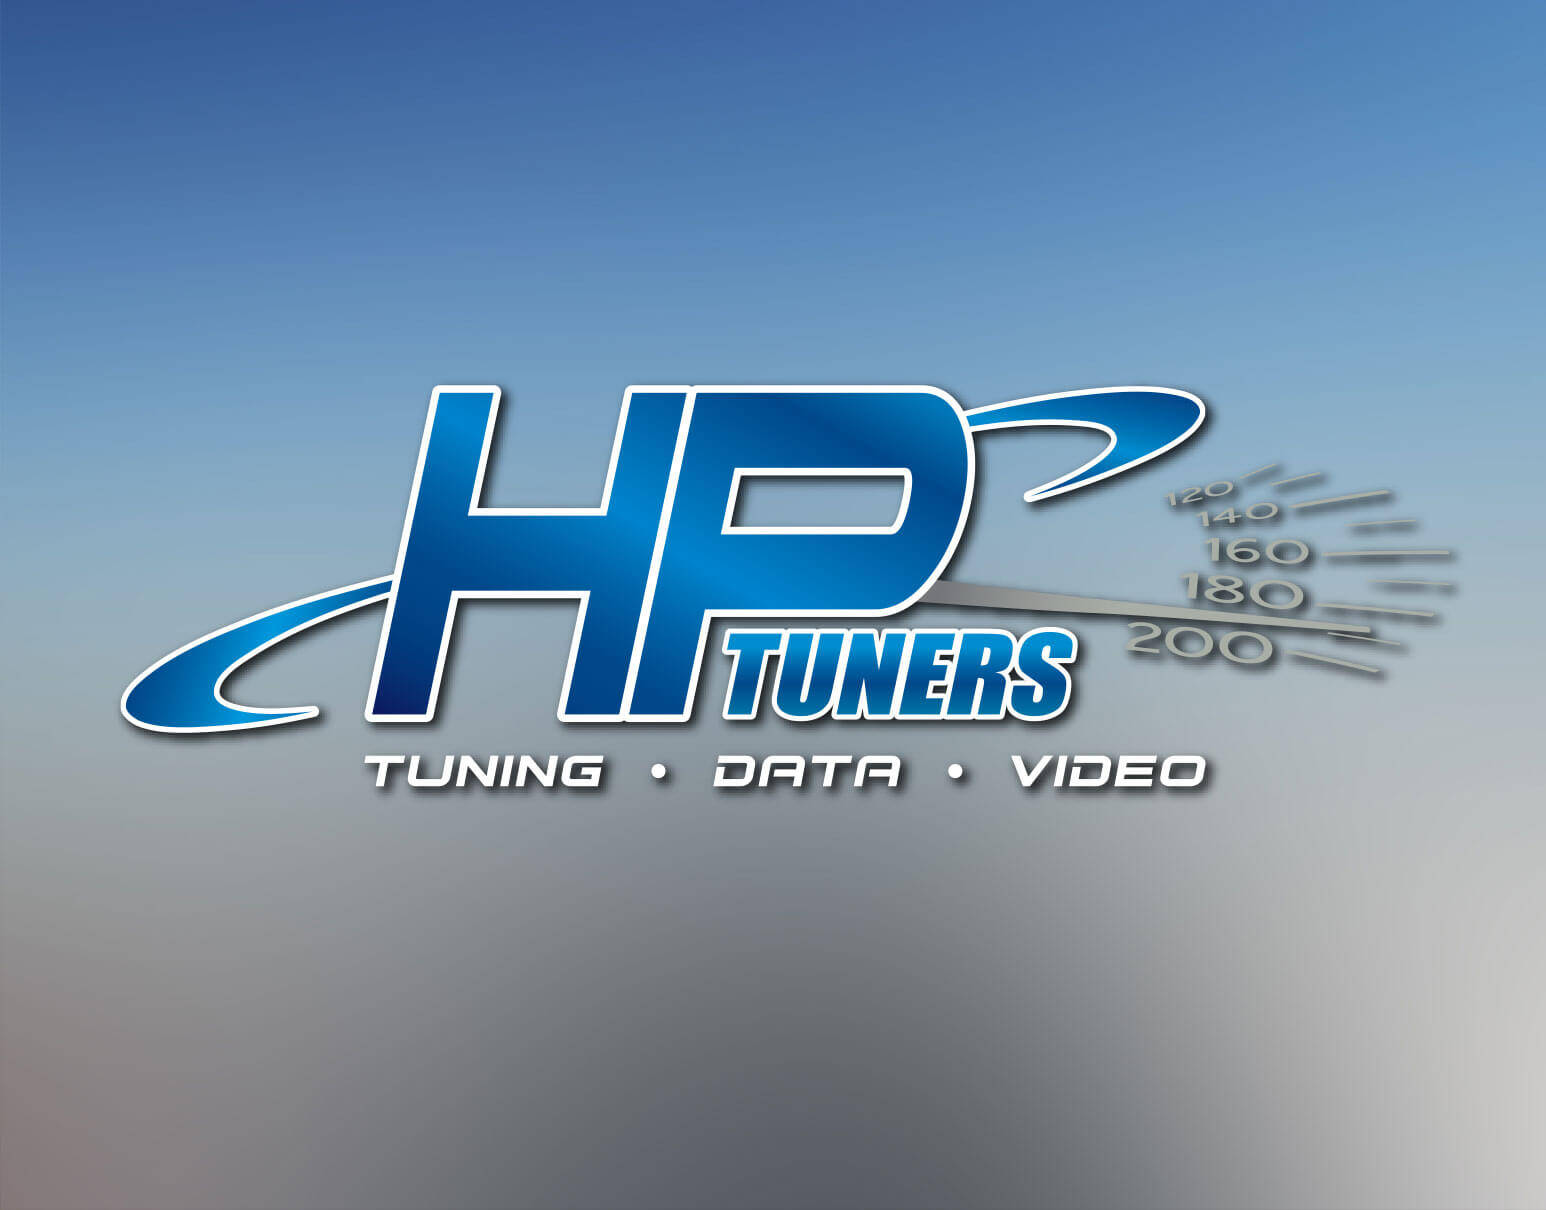 HP Tuners Logo - Website Design and Development | visionsConnect